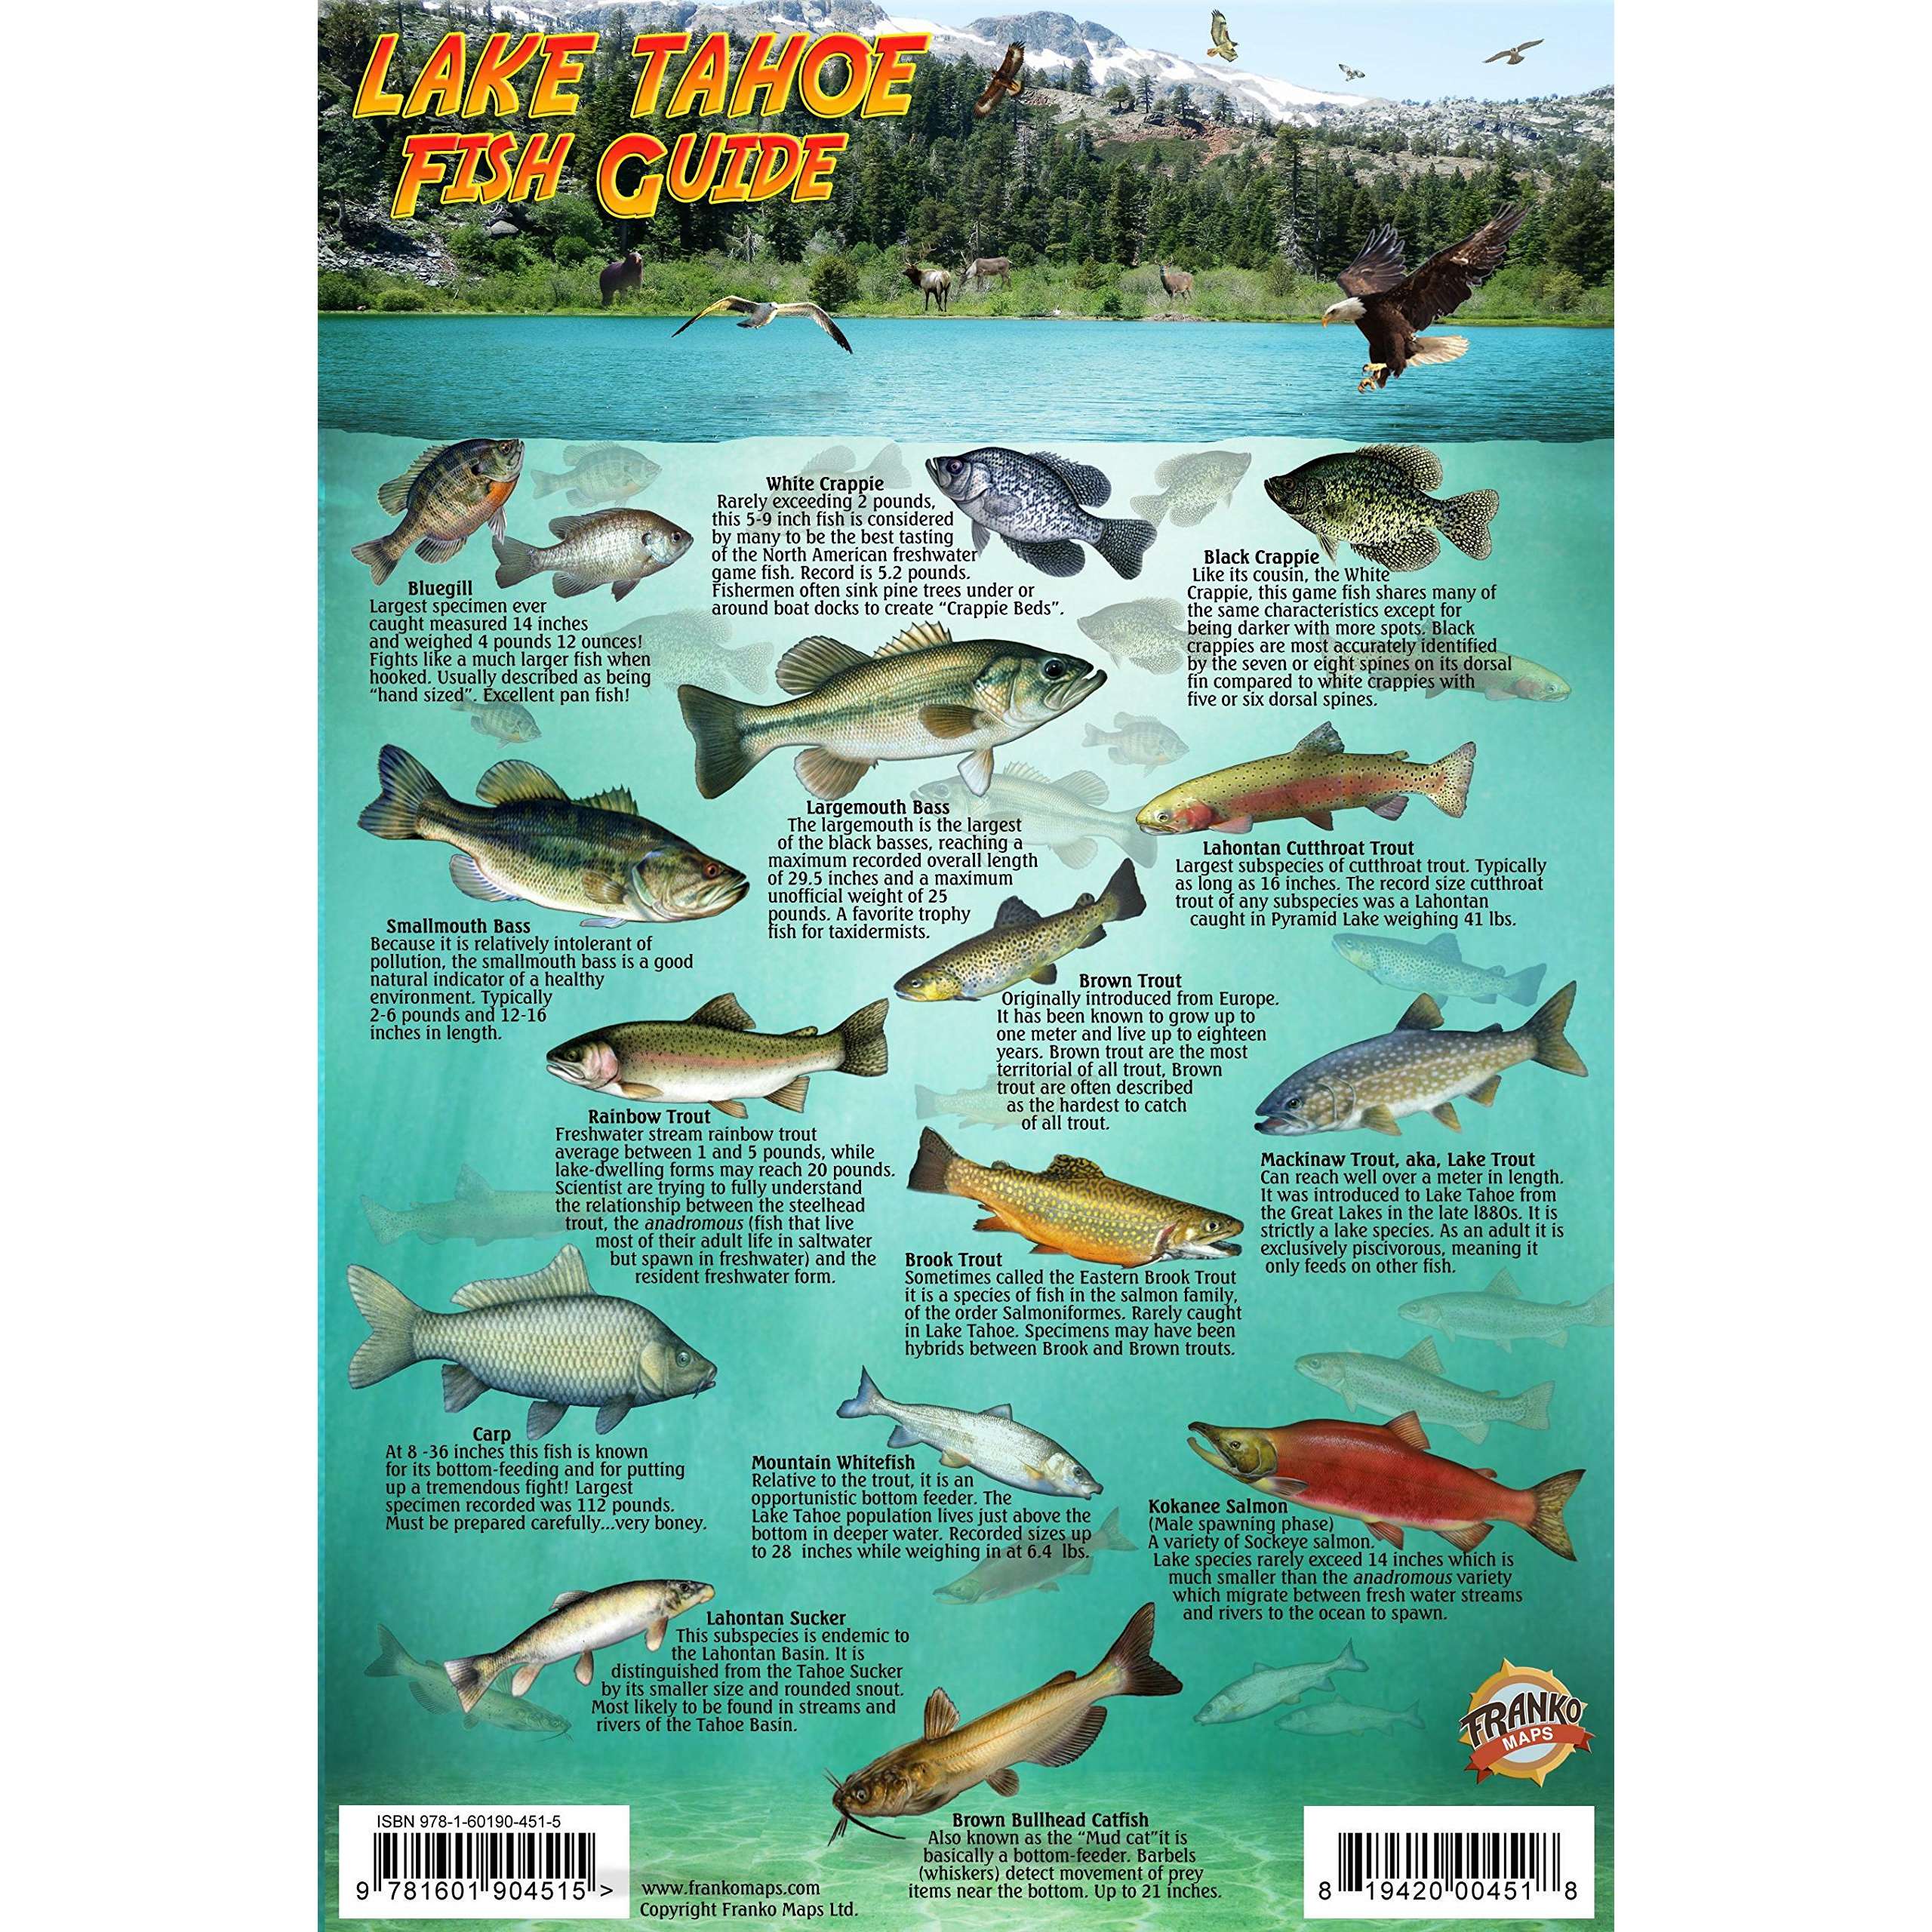 Outdoors, Camping & Travel :: All Outdoors Books :: Fish & Sealife  Identification Guides :: Lake Tahoe Map & Fish Guide - Paradise Cay -  Wholesale Books, Gifts, Navigational Charts, On Demand Publishing